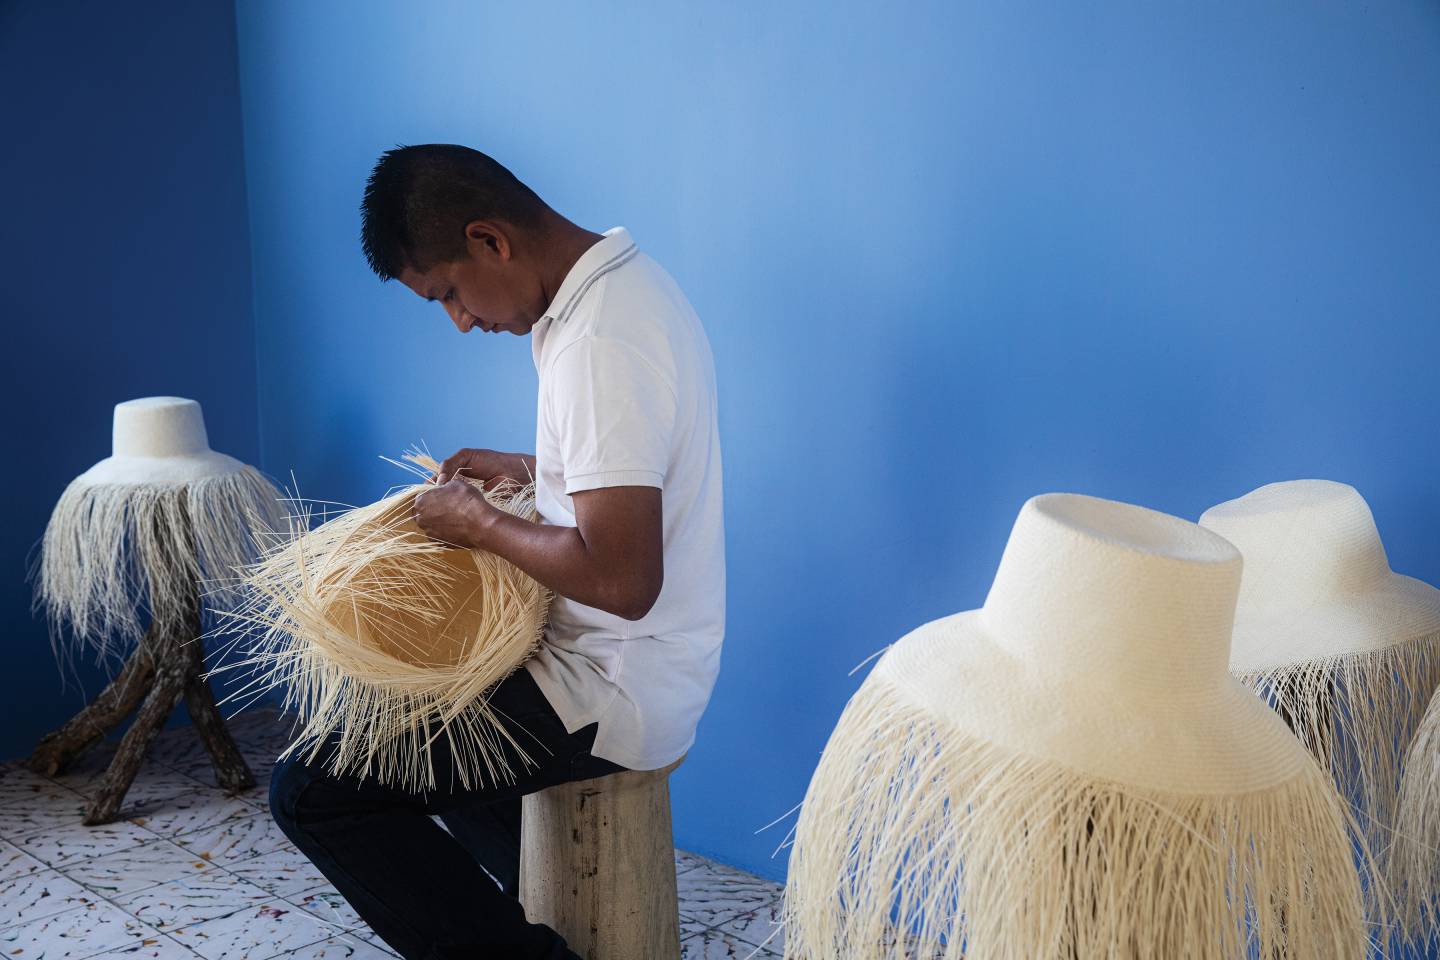 An artisan weaves a Panama hat in a workshop